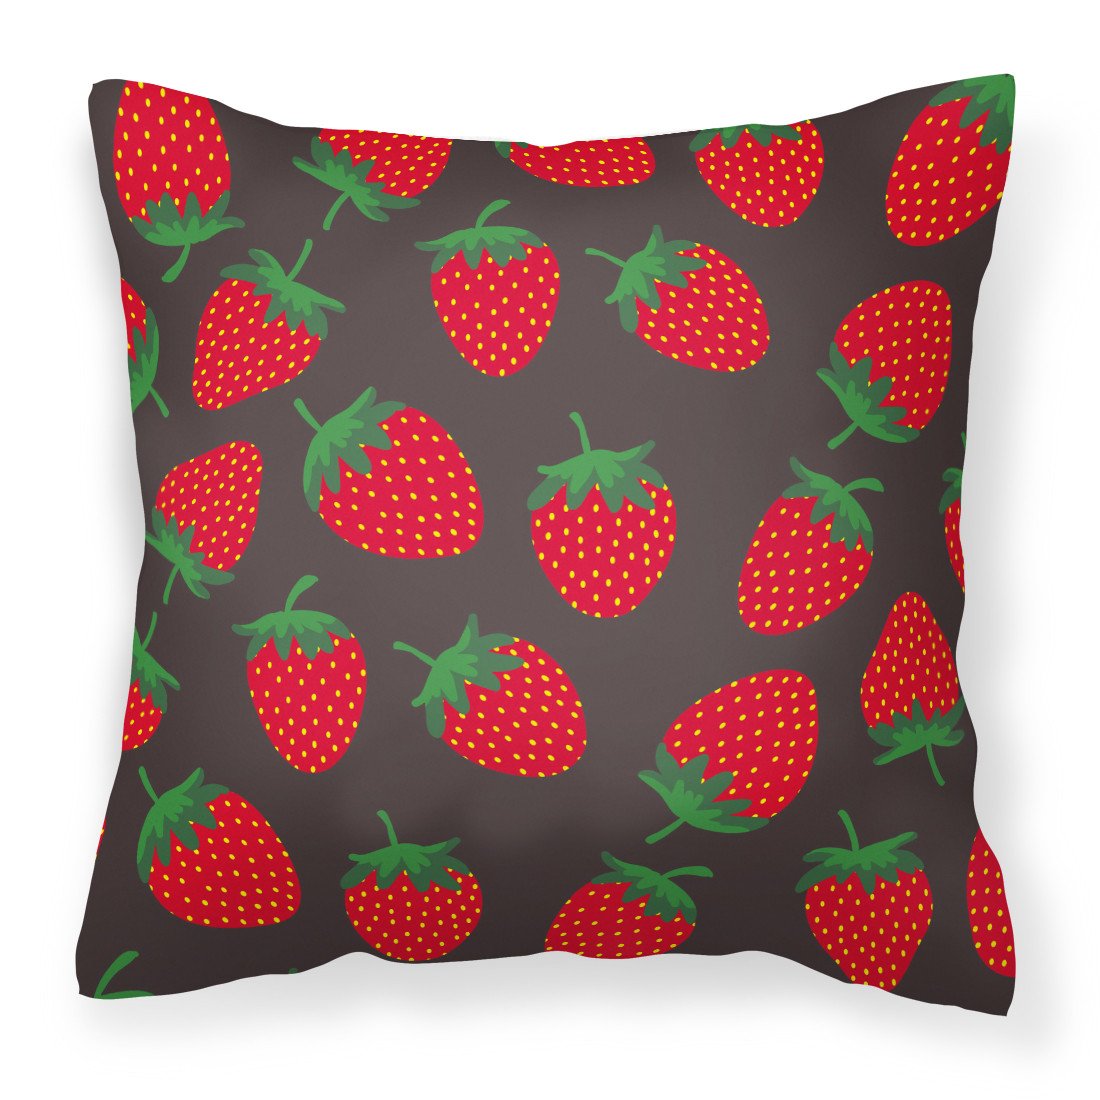 Strawberries on Gray Fabric Decorative Pillow BB5137PW1818 by Caroline's Treasures